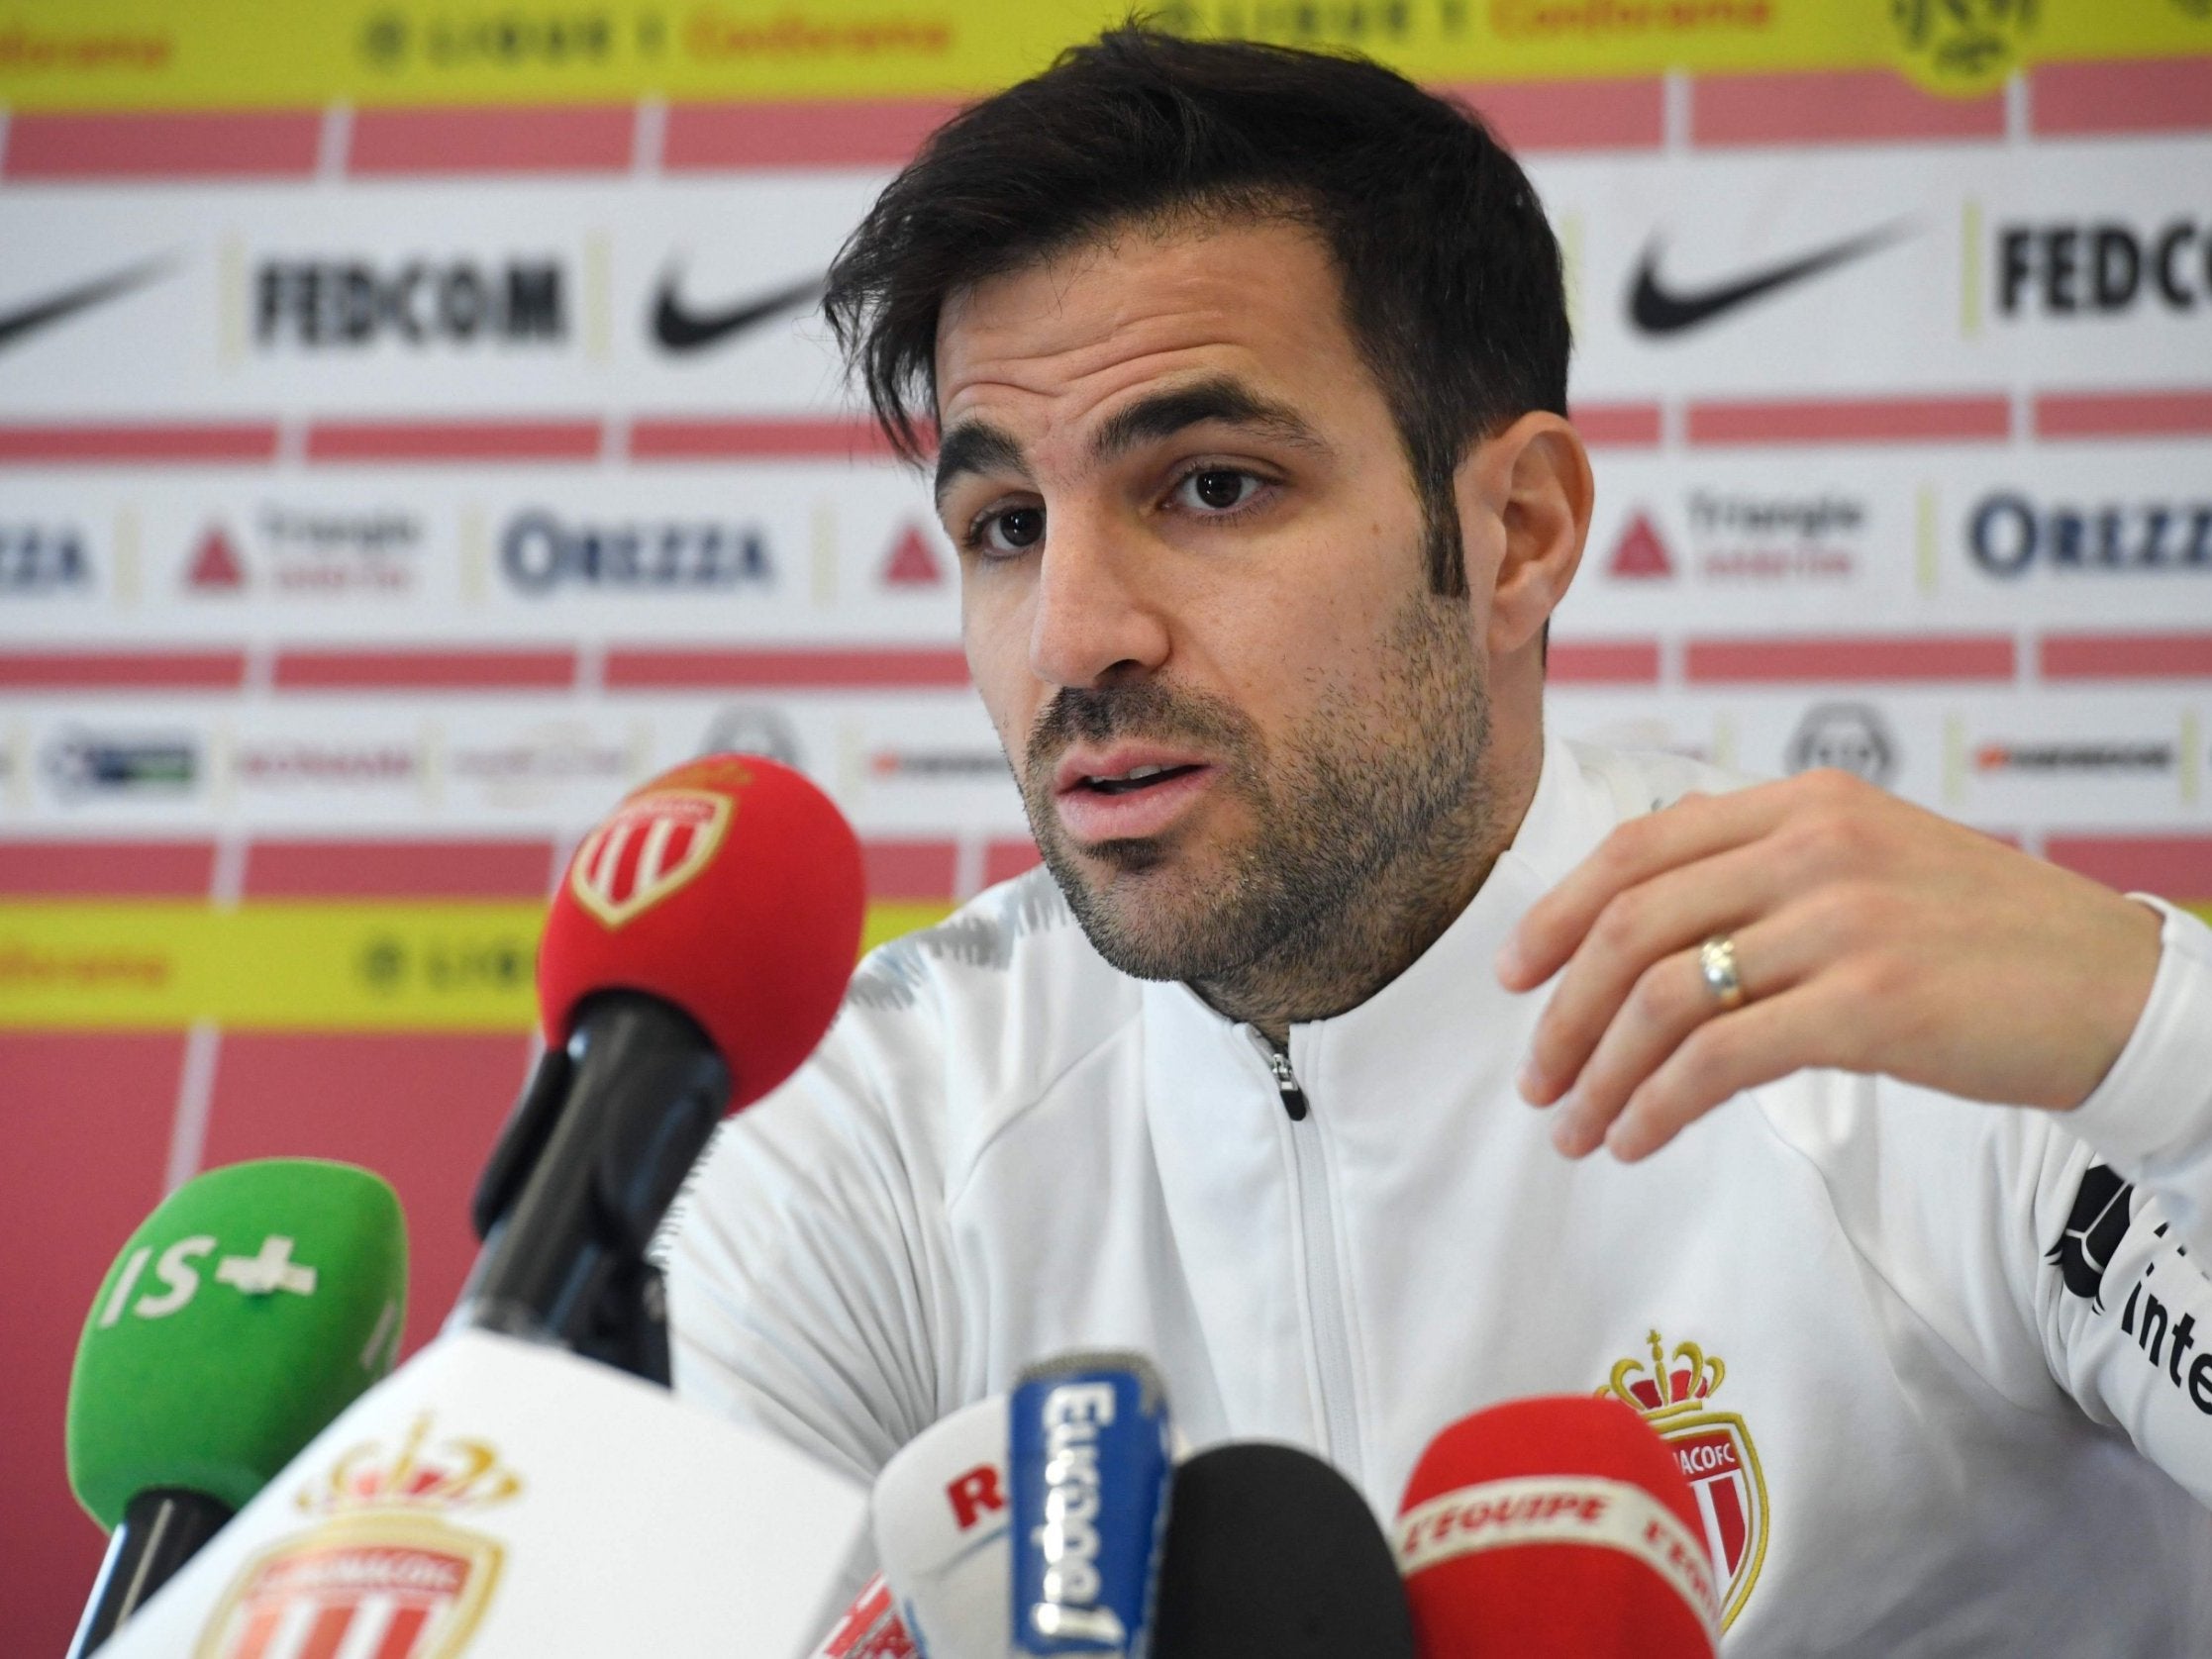 Fabregas has discussed the best XI from his former teammates